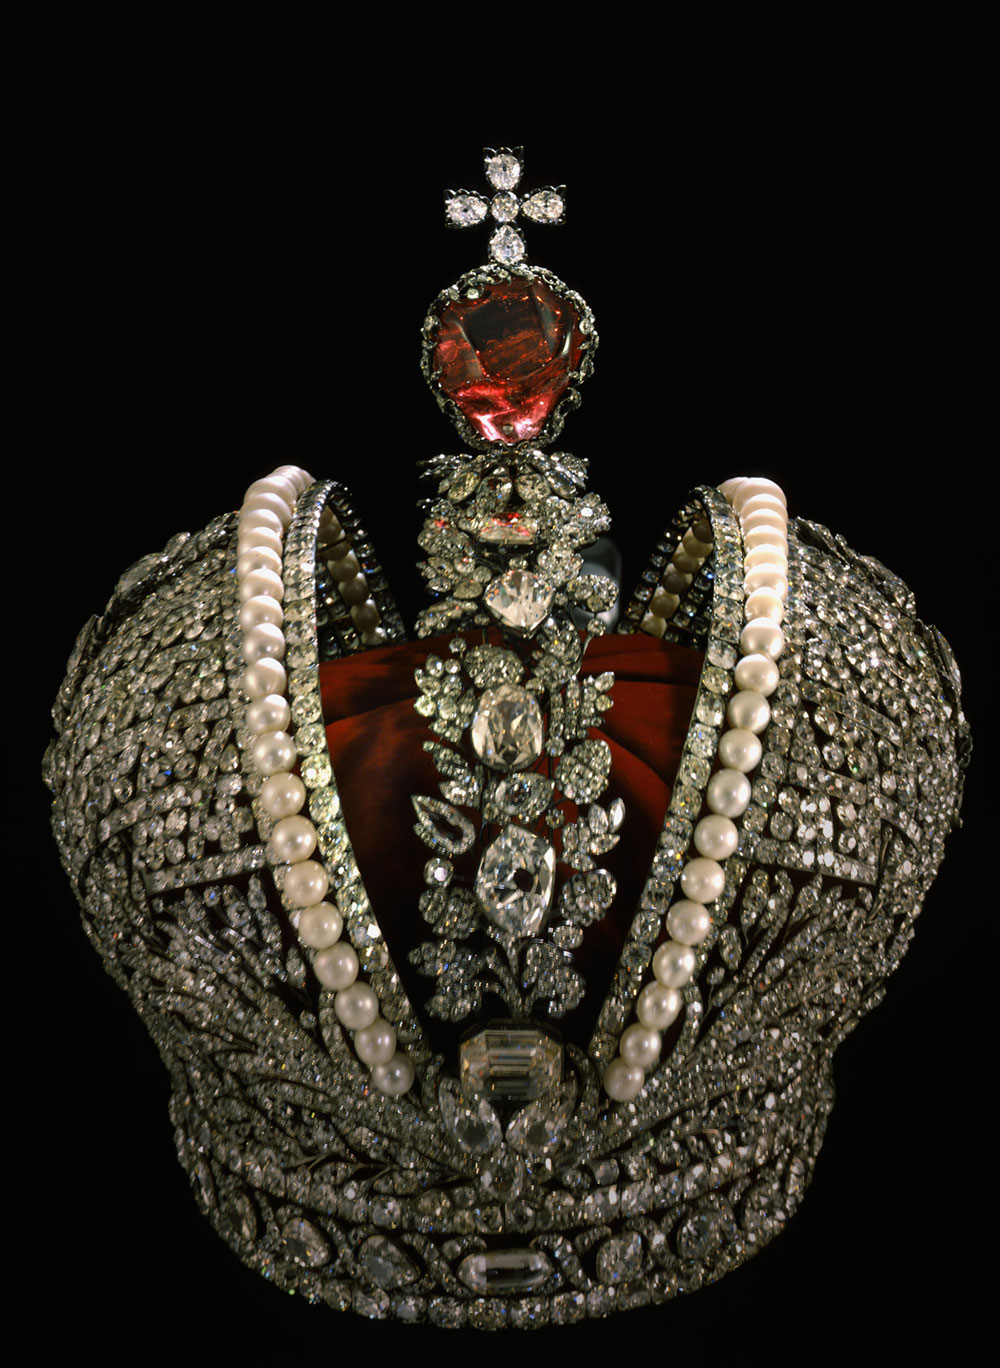 The Imperial Russian Crown. Click on the photo for a larger image.